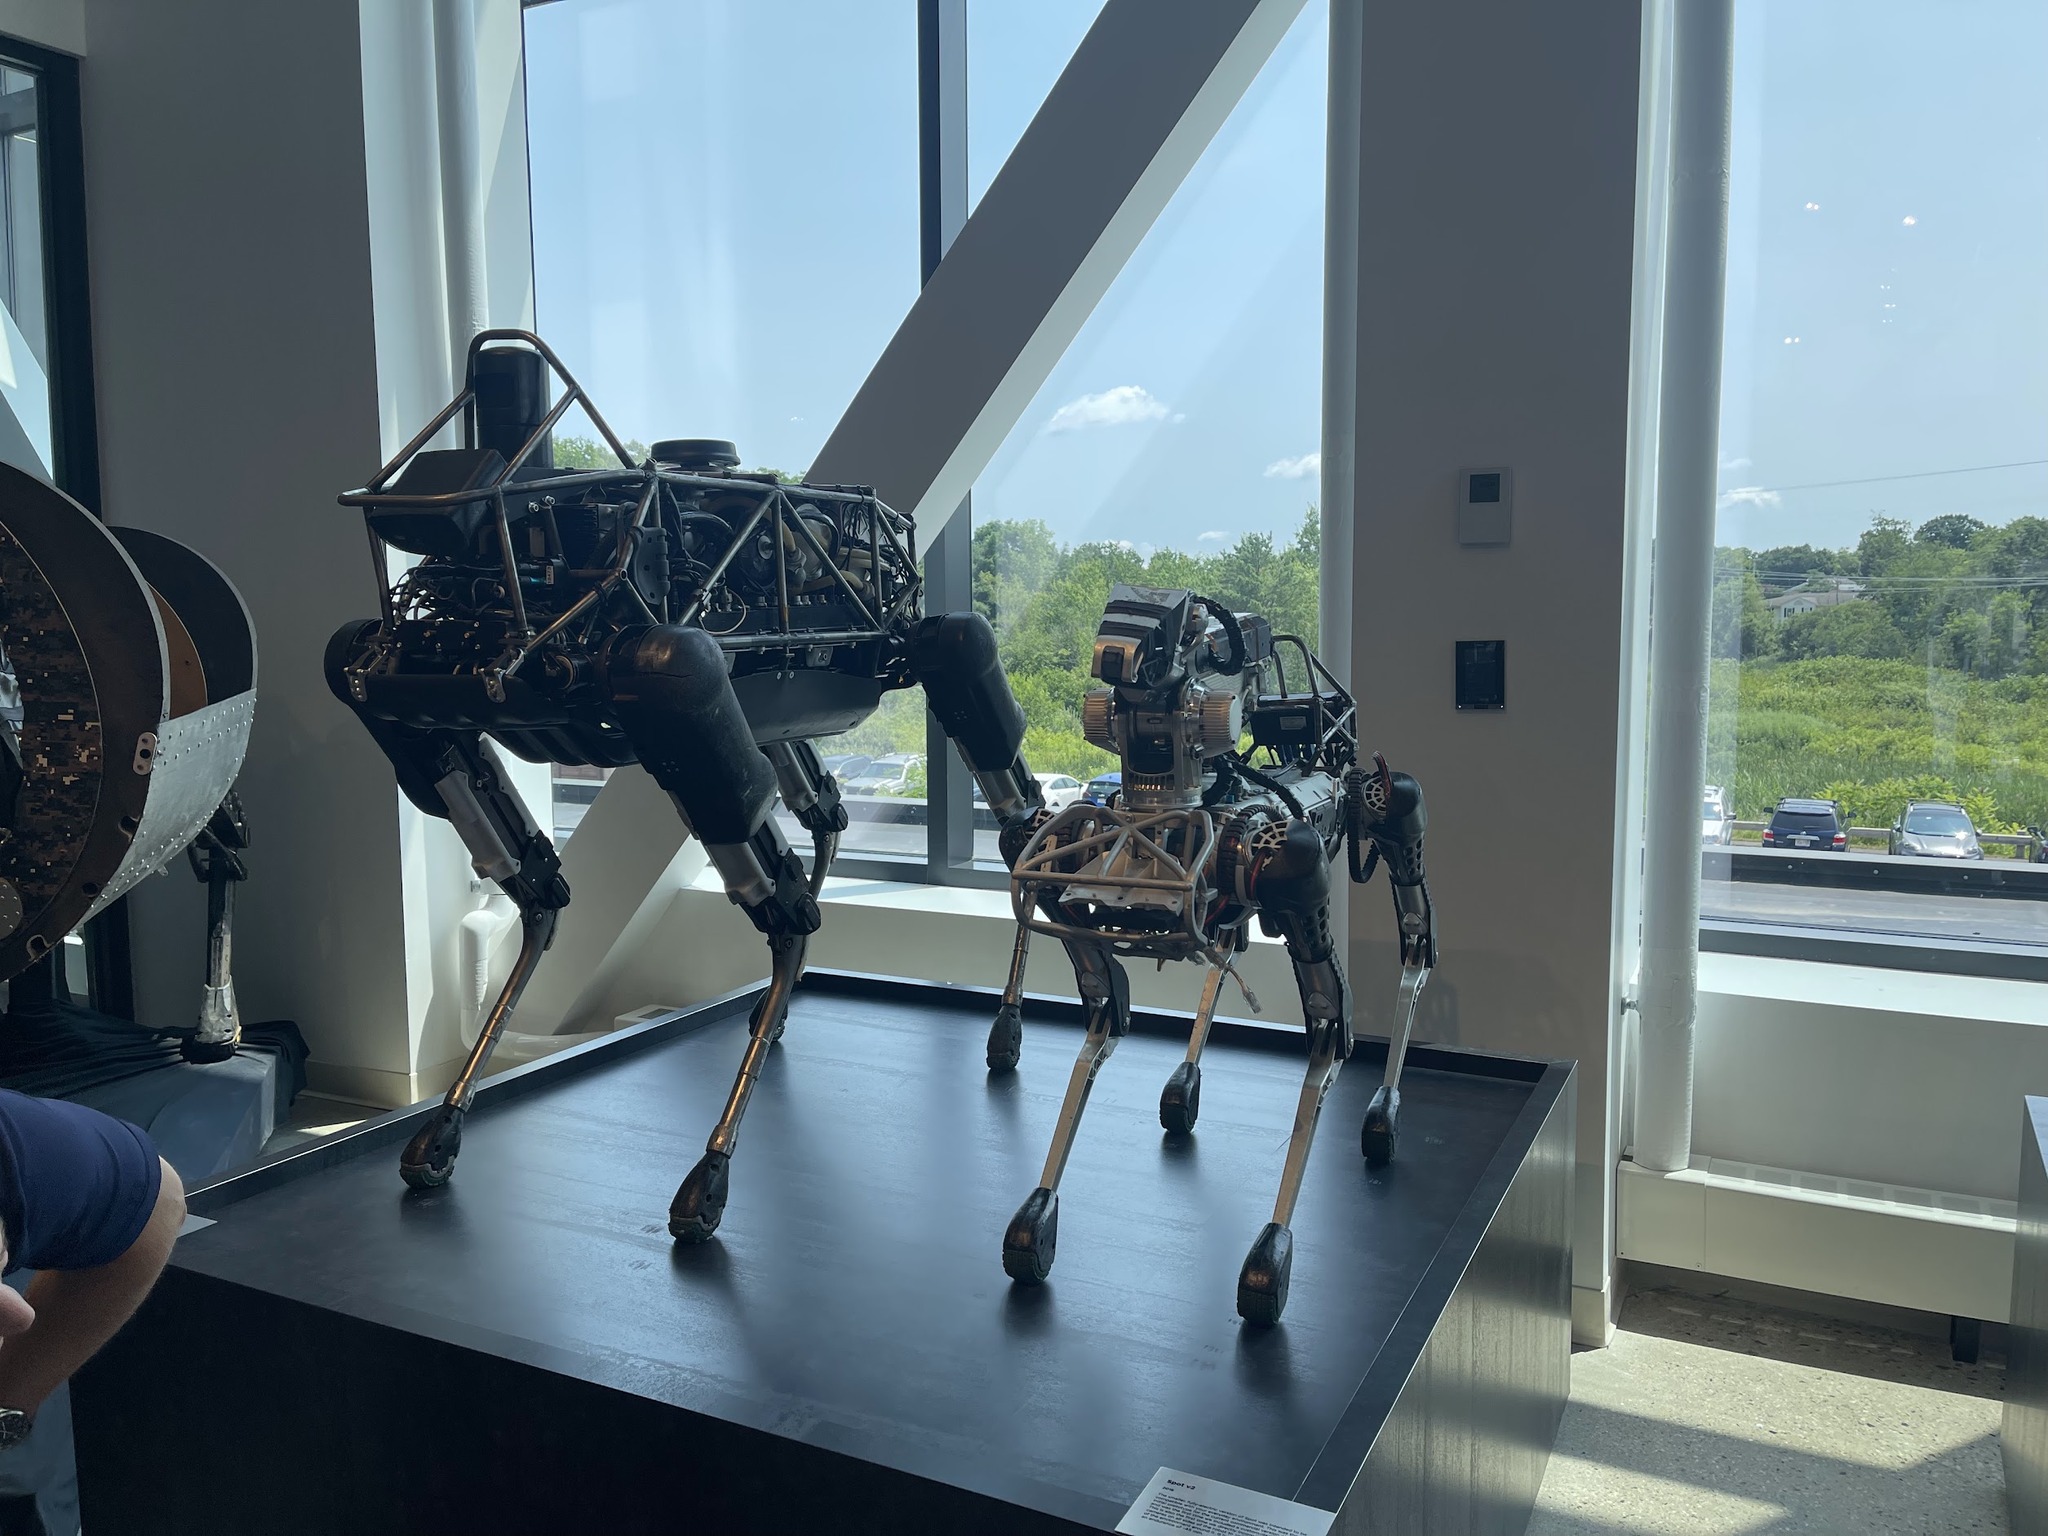 The technology at the Boston Dynamics facilities.